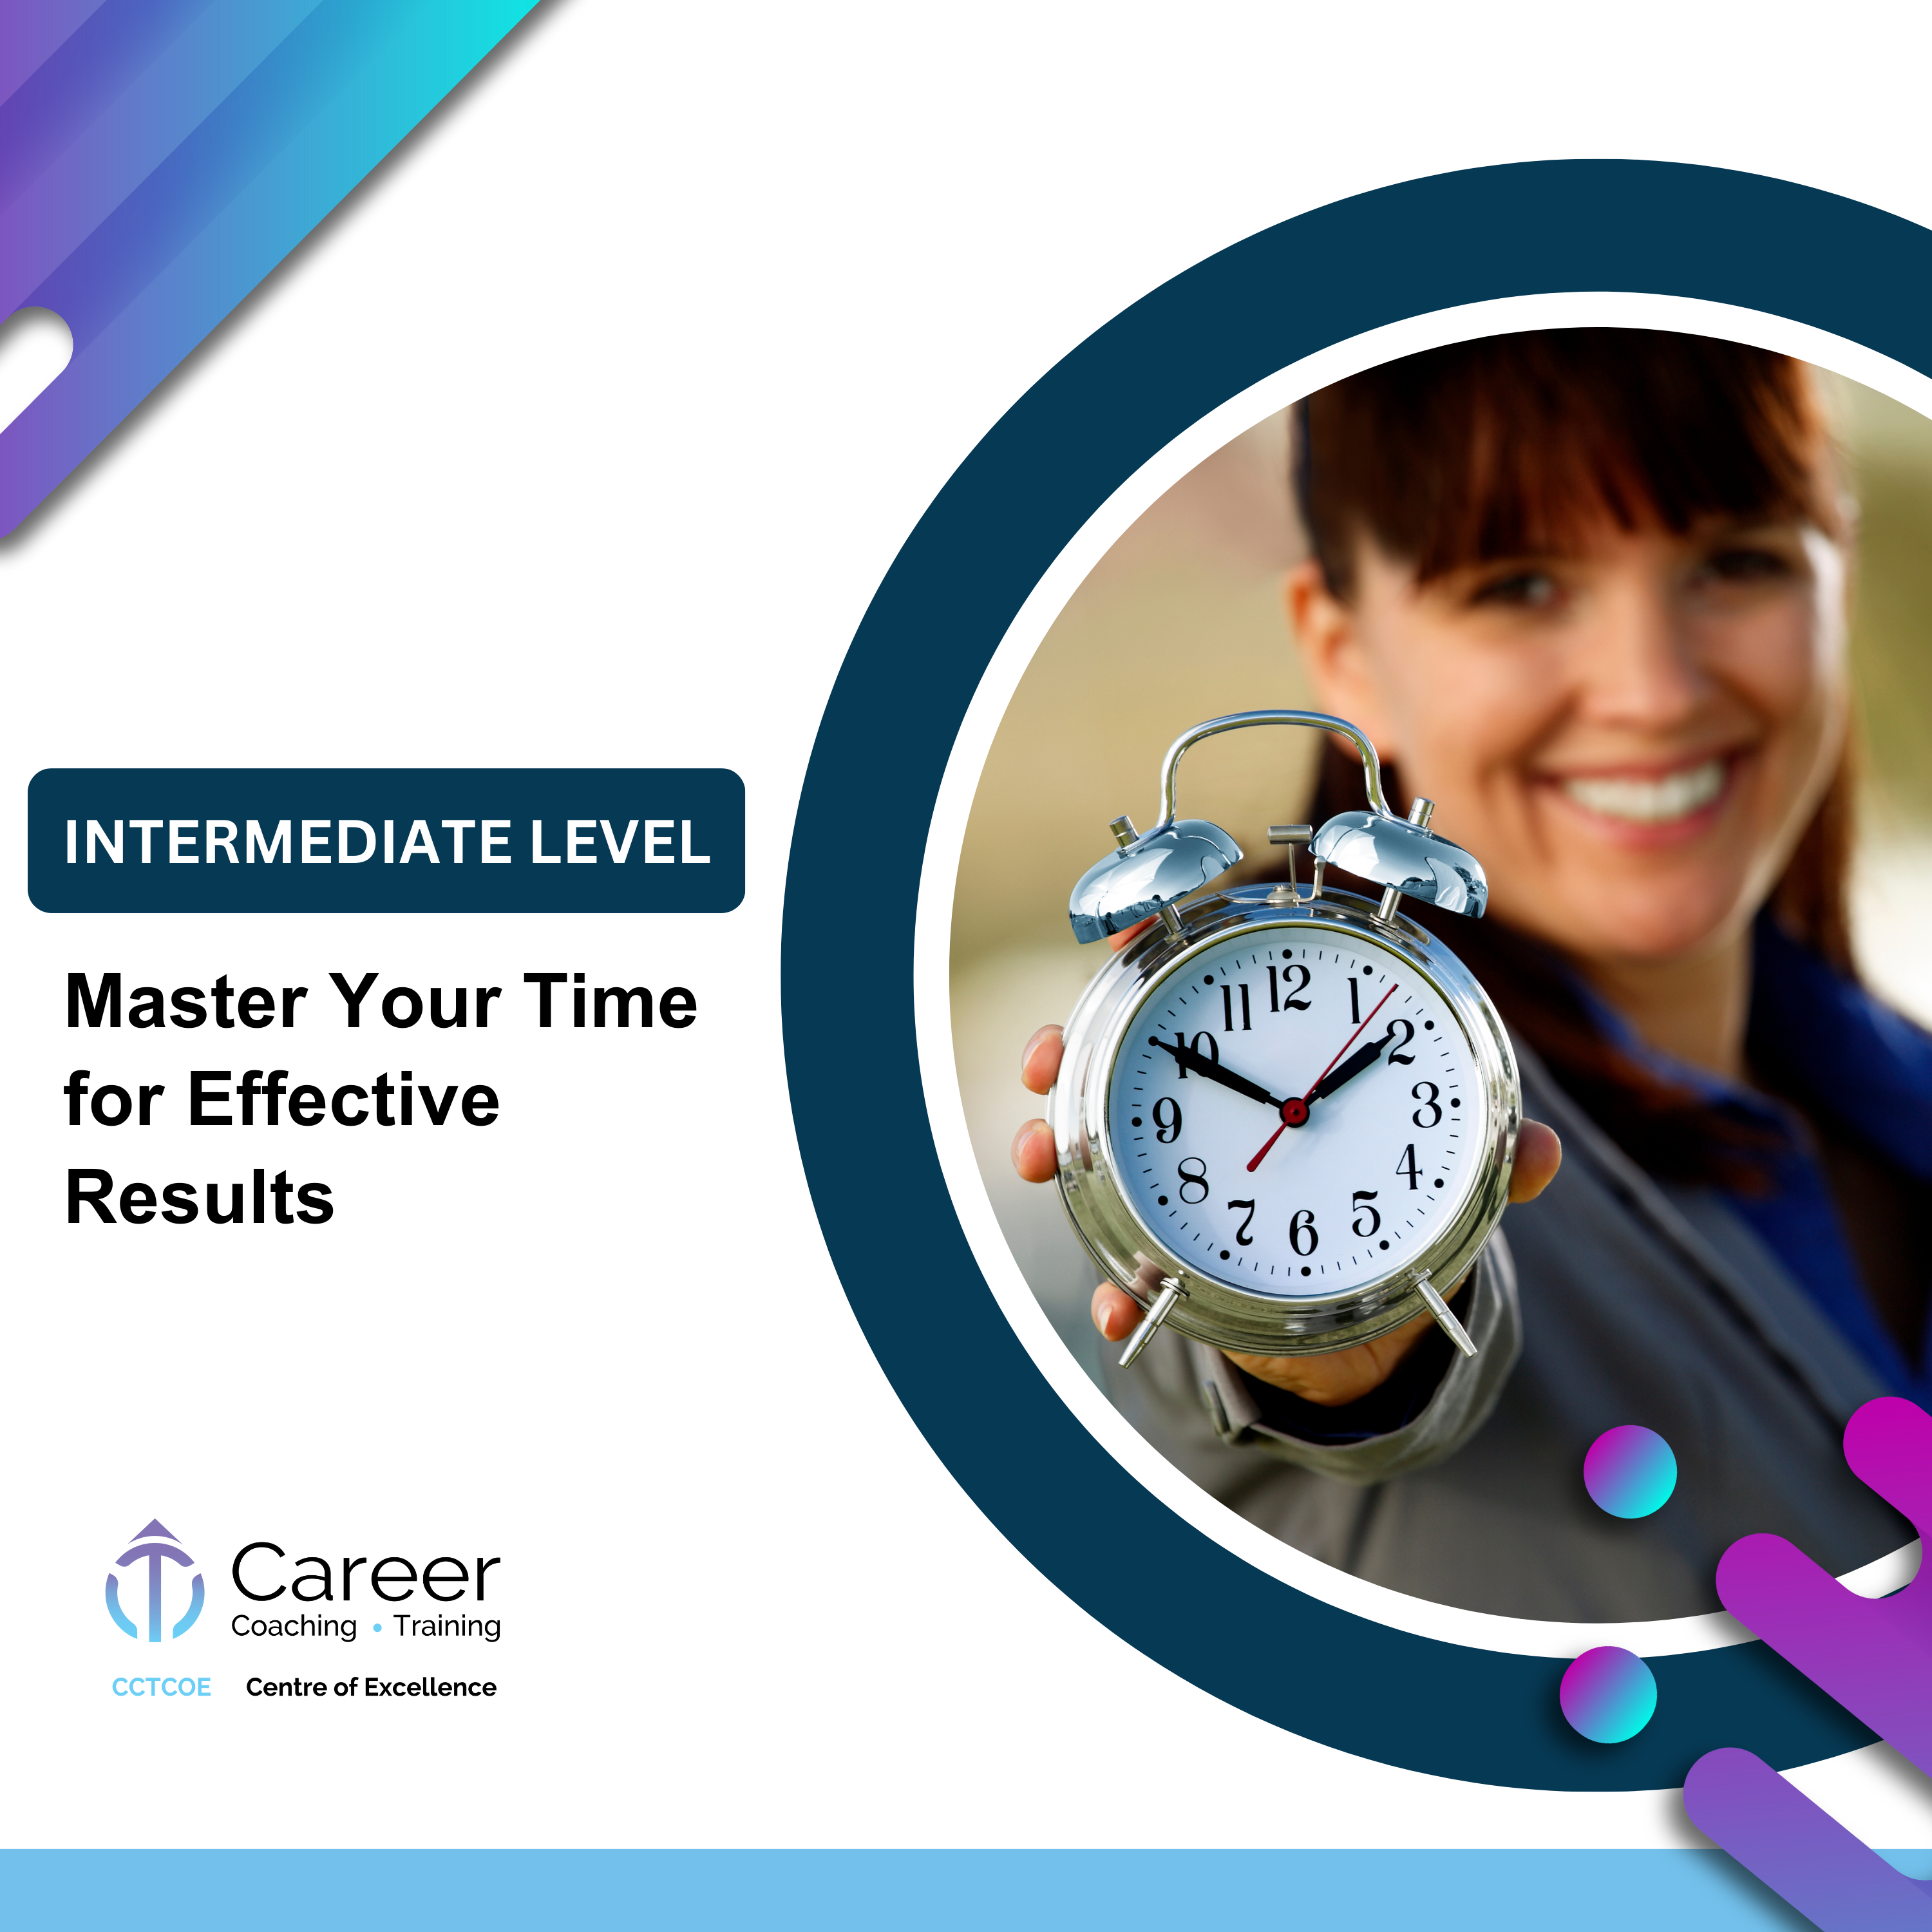 Master Your Time for Effective Results